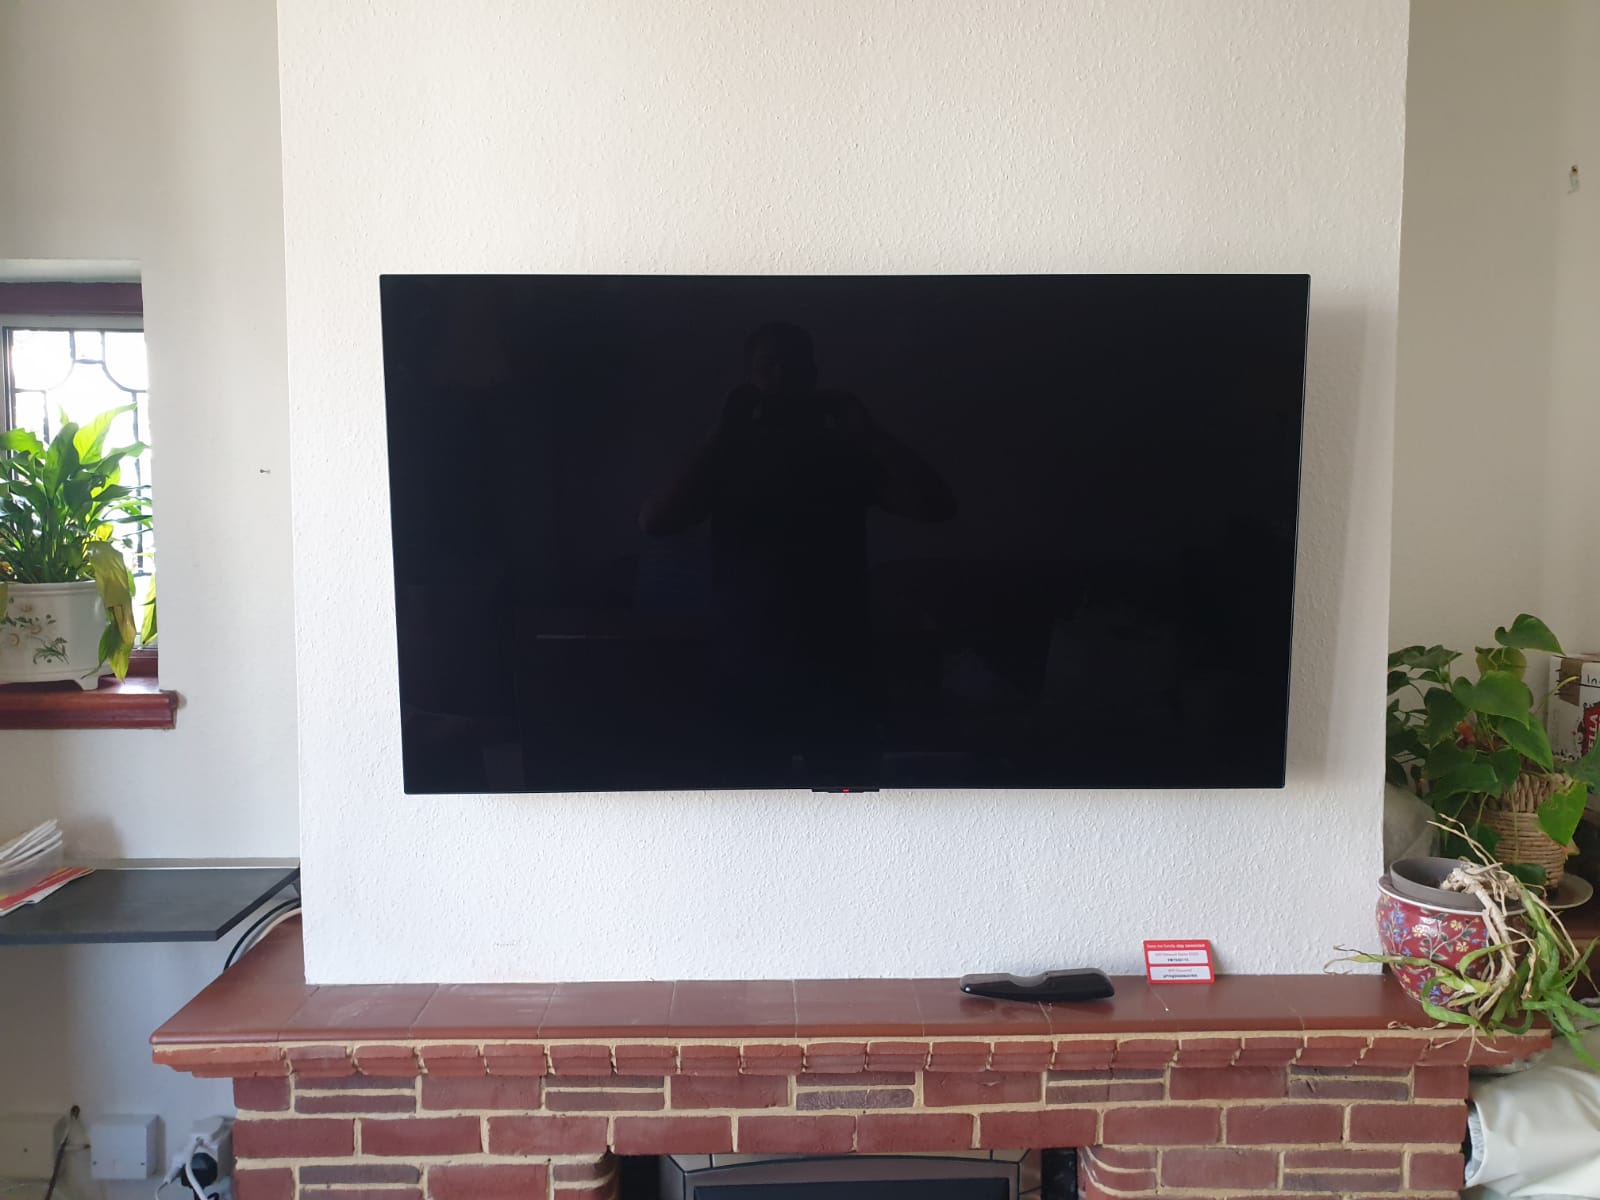 TV wall mounted onto chimney breast with cables going into chimney and coming out the side near the sockets.